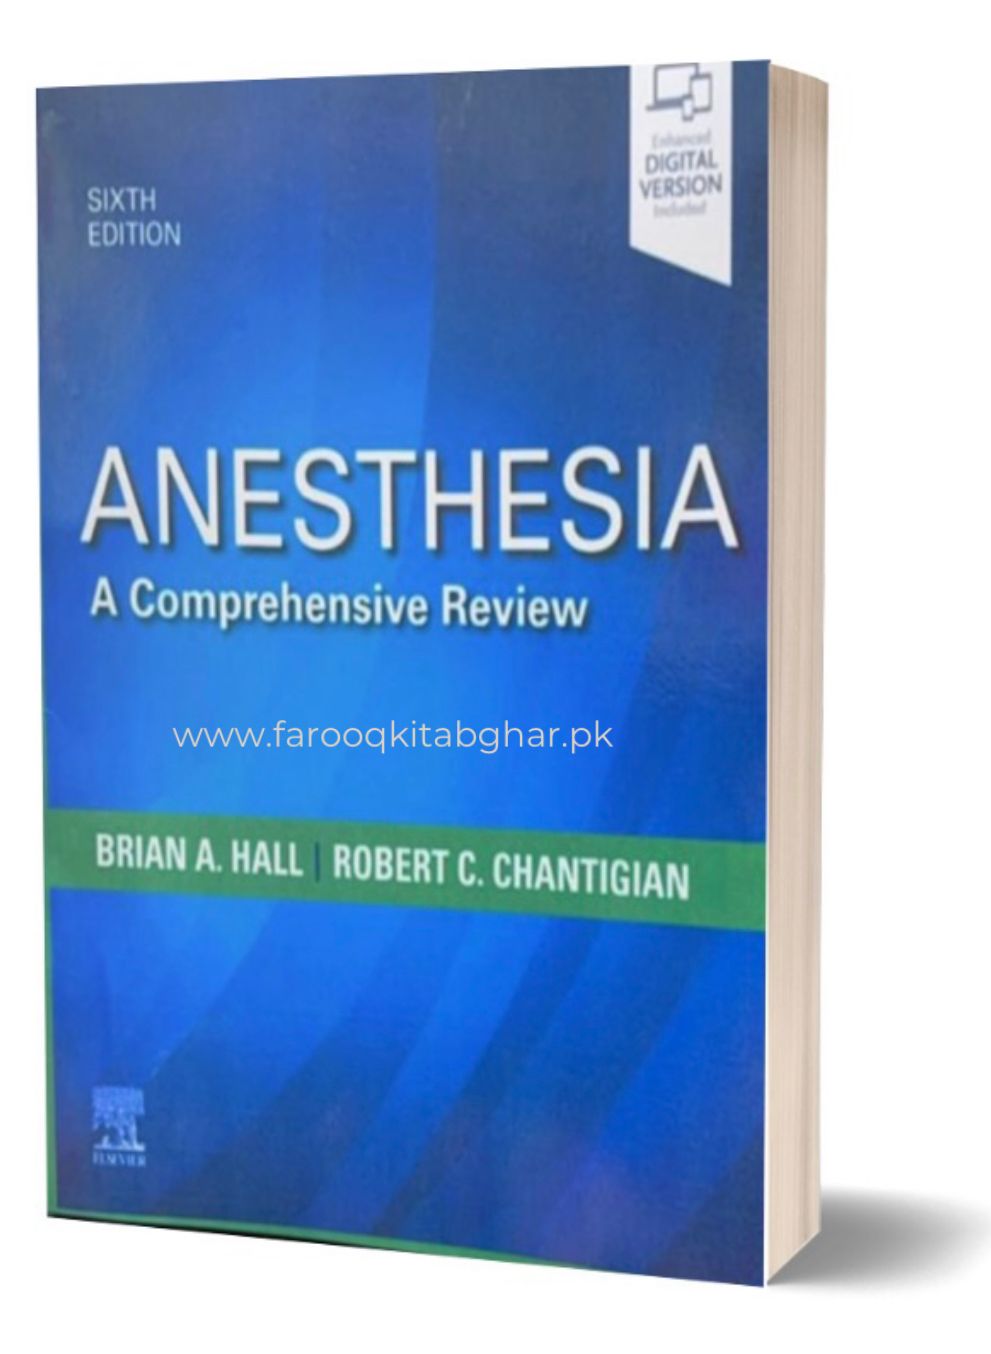 Anesthesia: A Comprehensive Review 6th Edition , Brian A. Hall MD